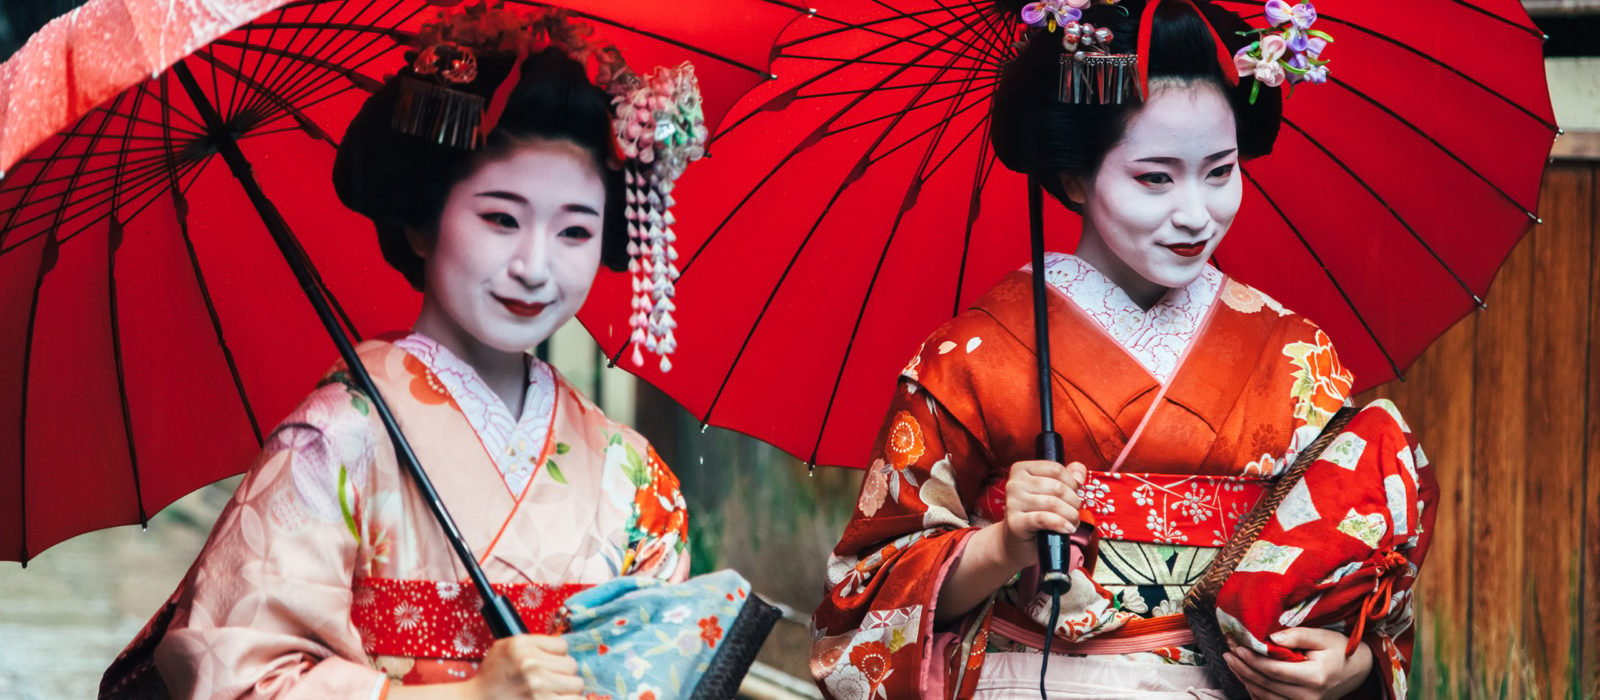 Two maiko geisha walking on a street in Kyoto with red umbrellas